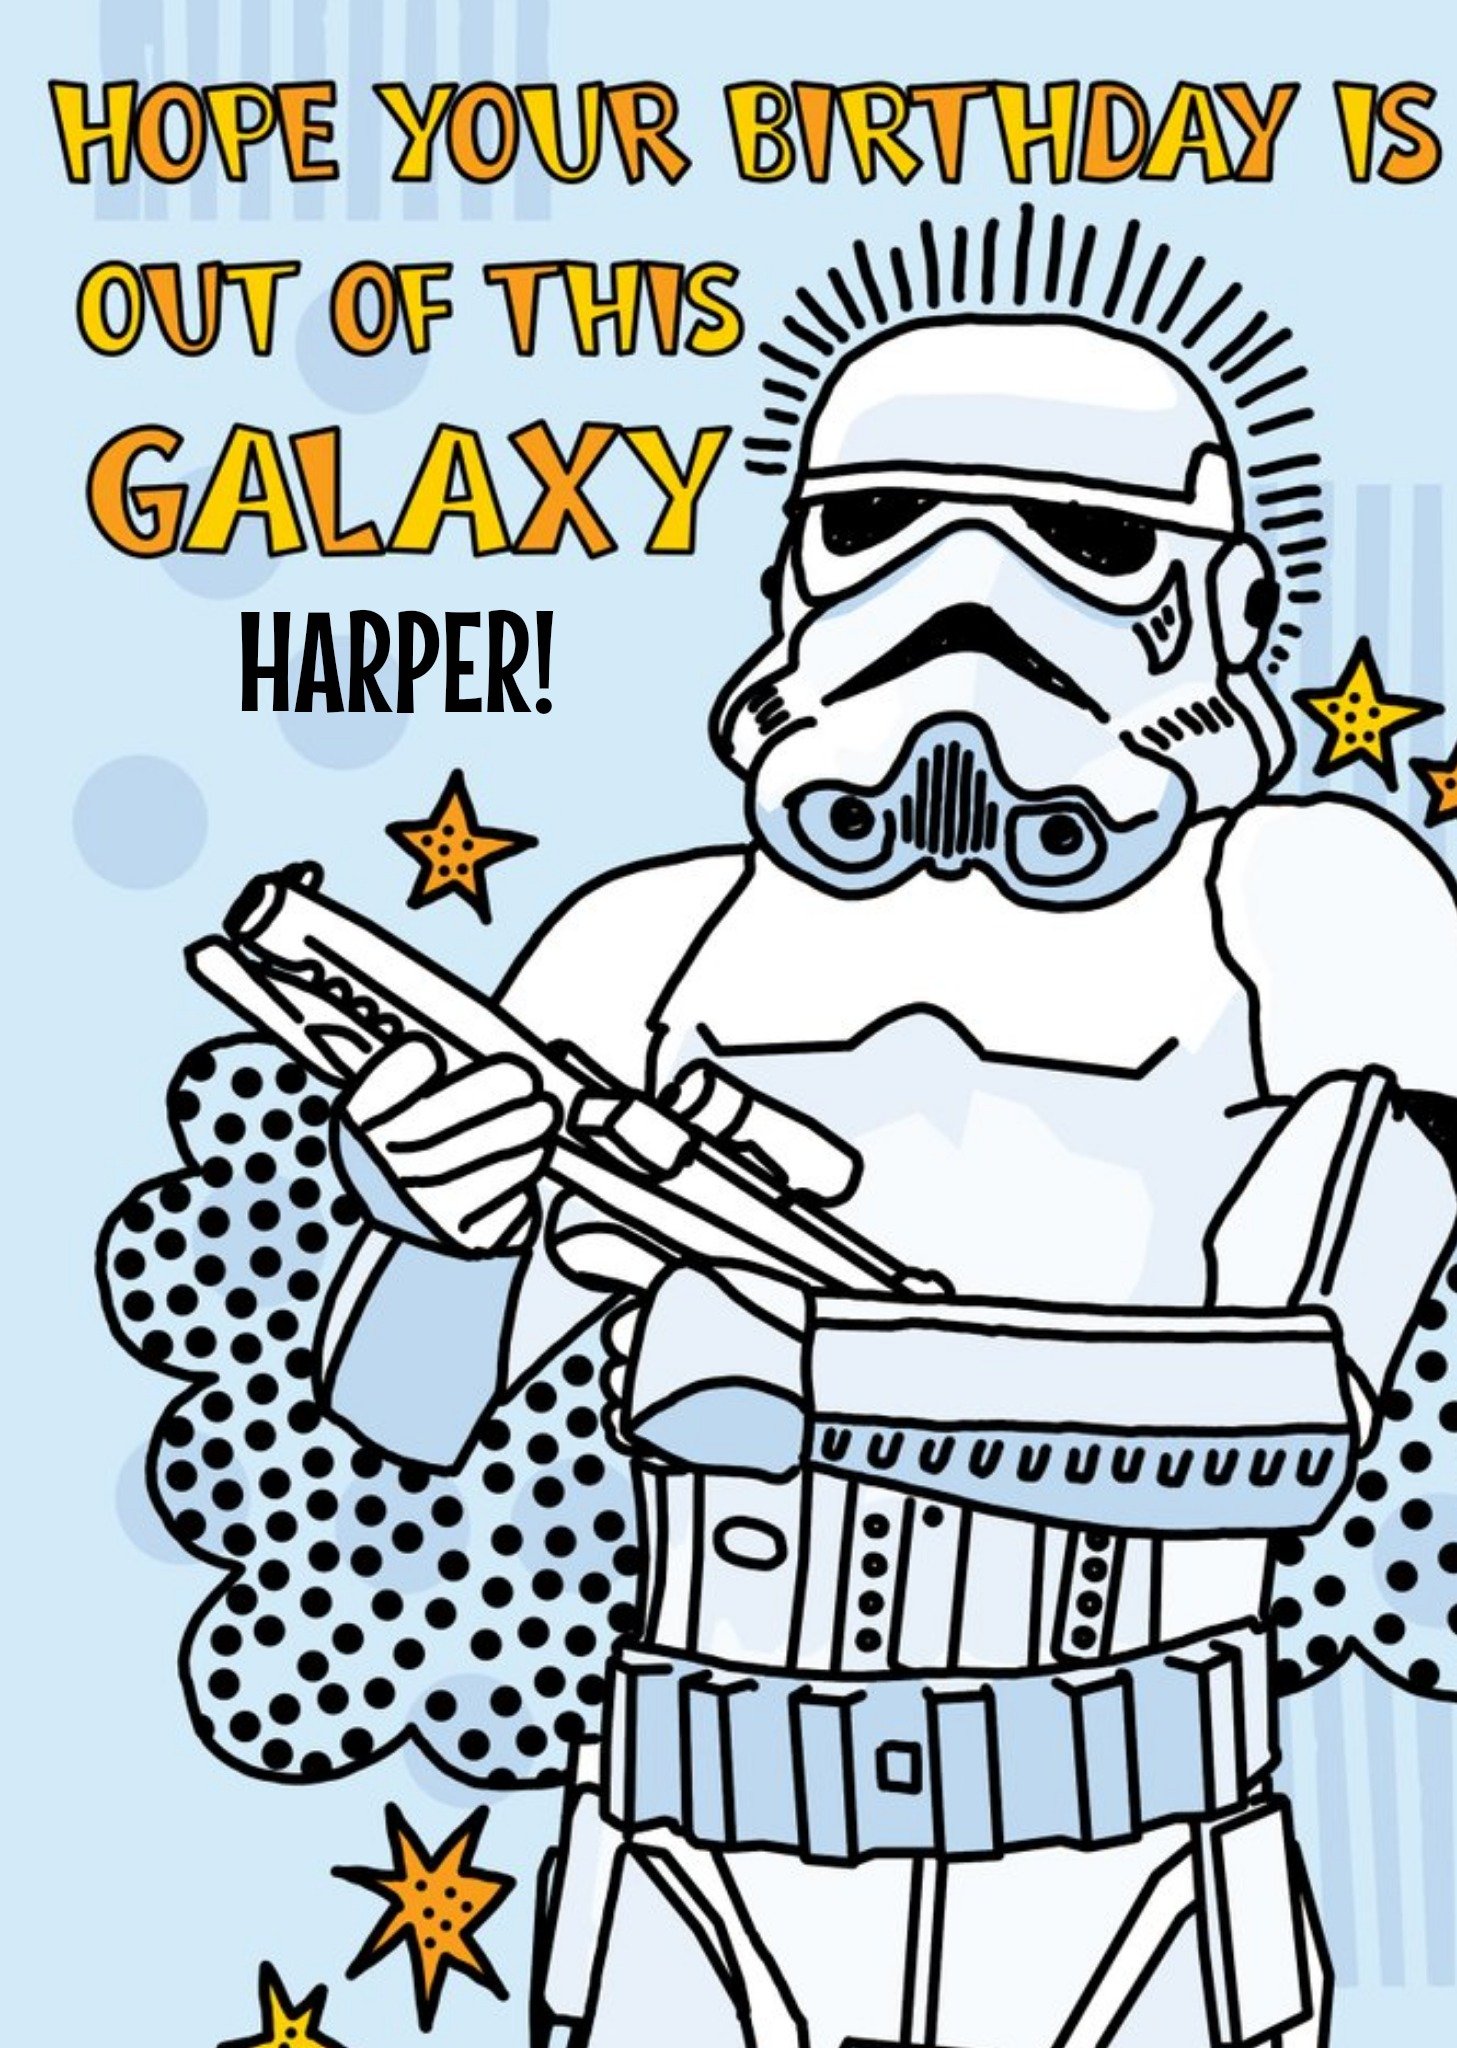 Disney Star Wars Stormtrooper Out Of This Galaxy Kids Birthday Card, Large